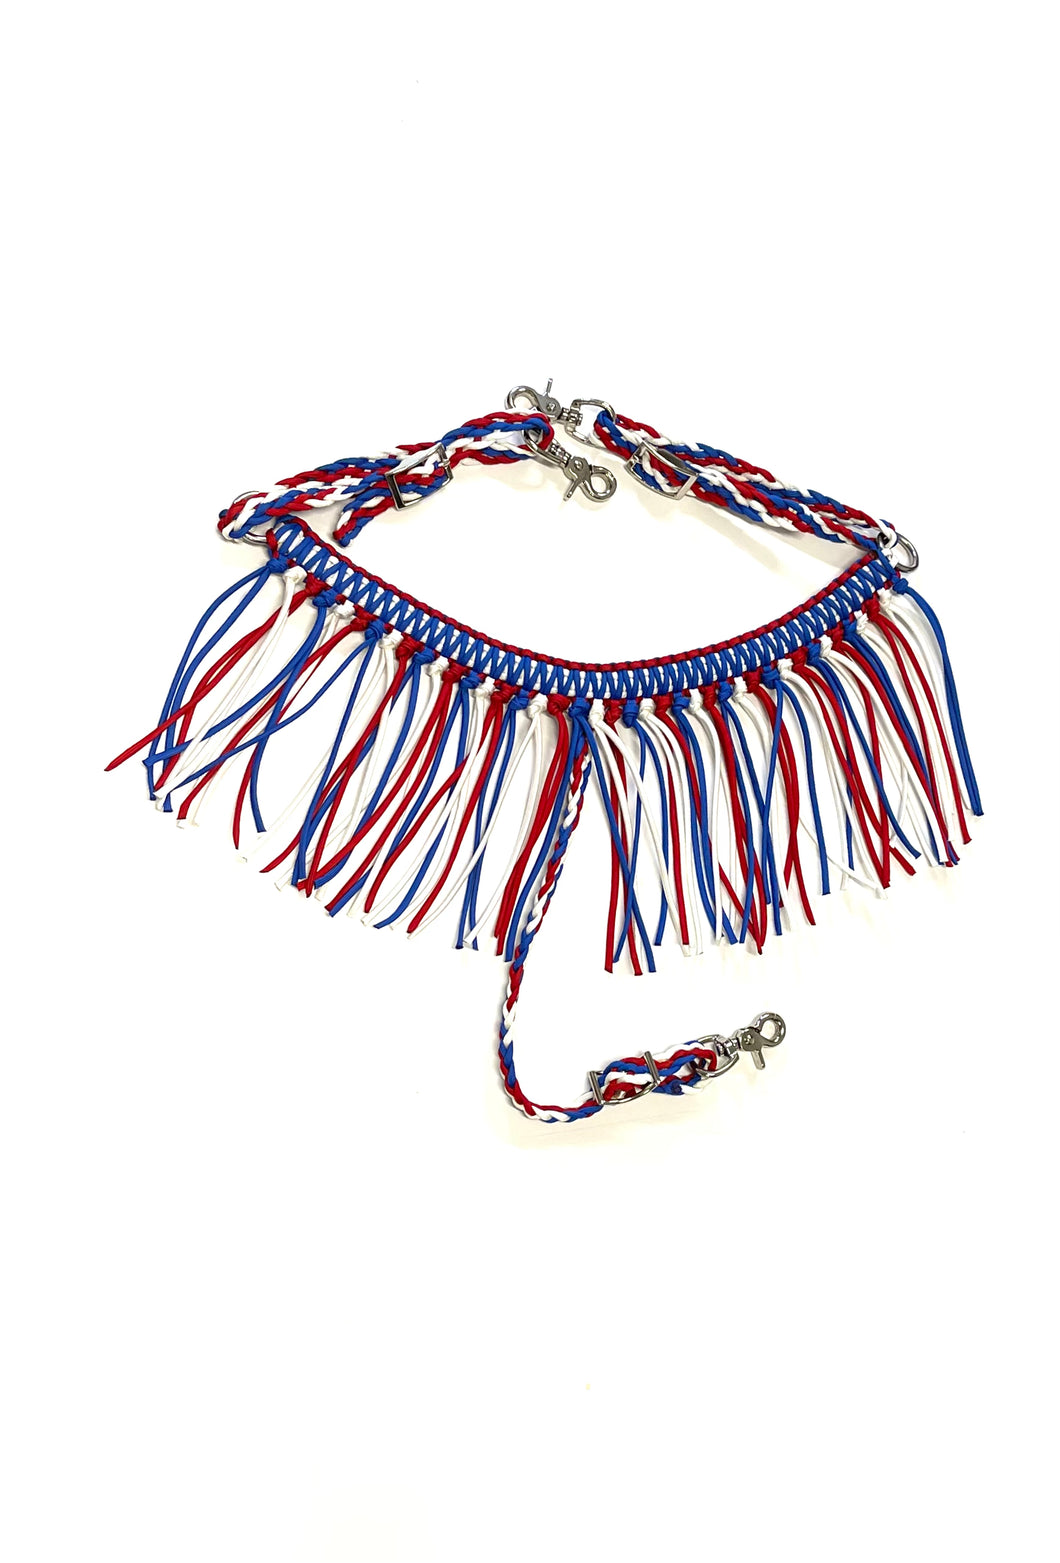 Pony Breast collar red white and blue